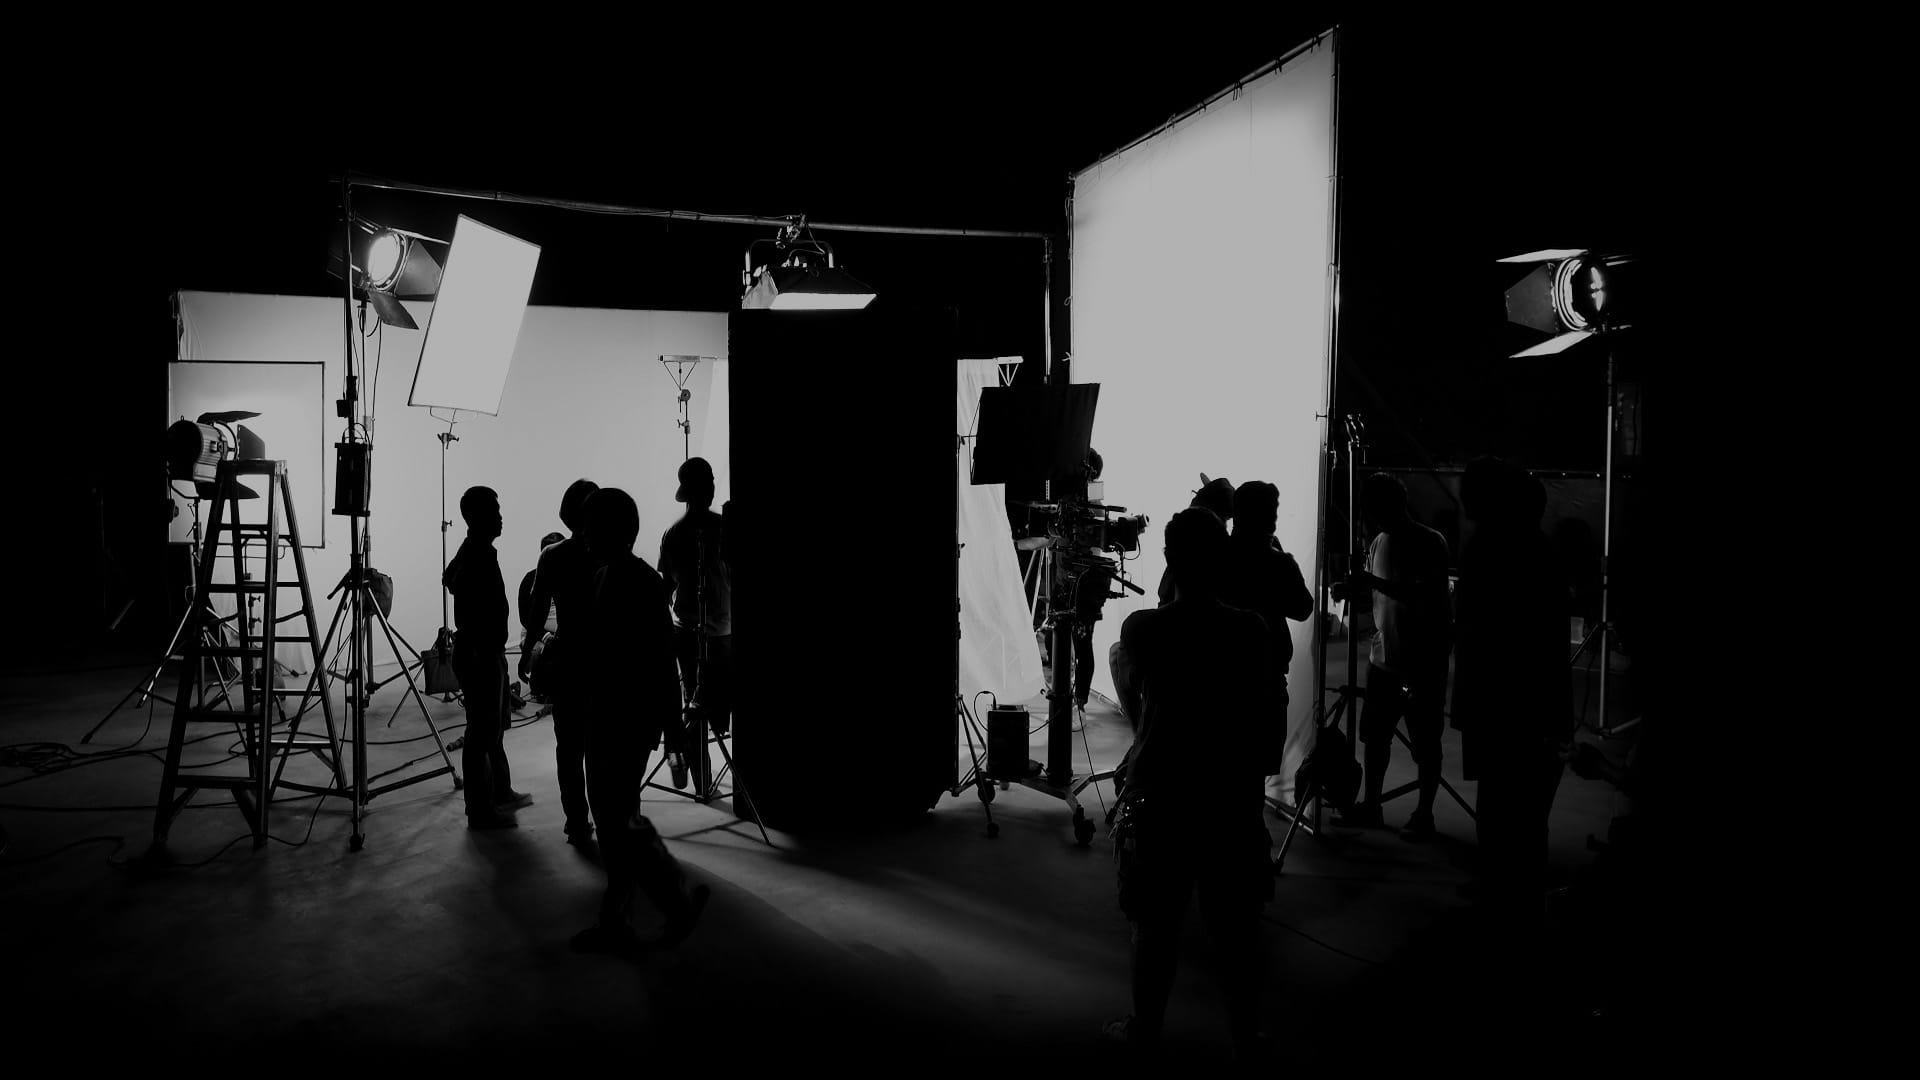 Back and white photo of silhouetted group of people working in a film studio